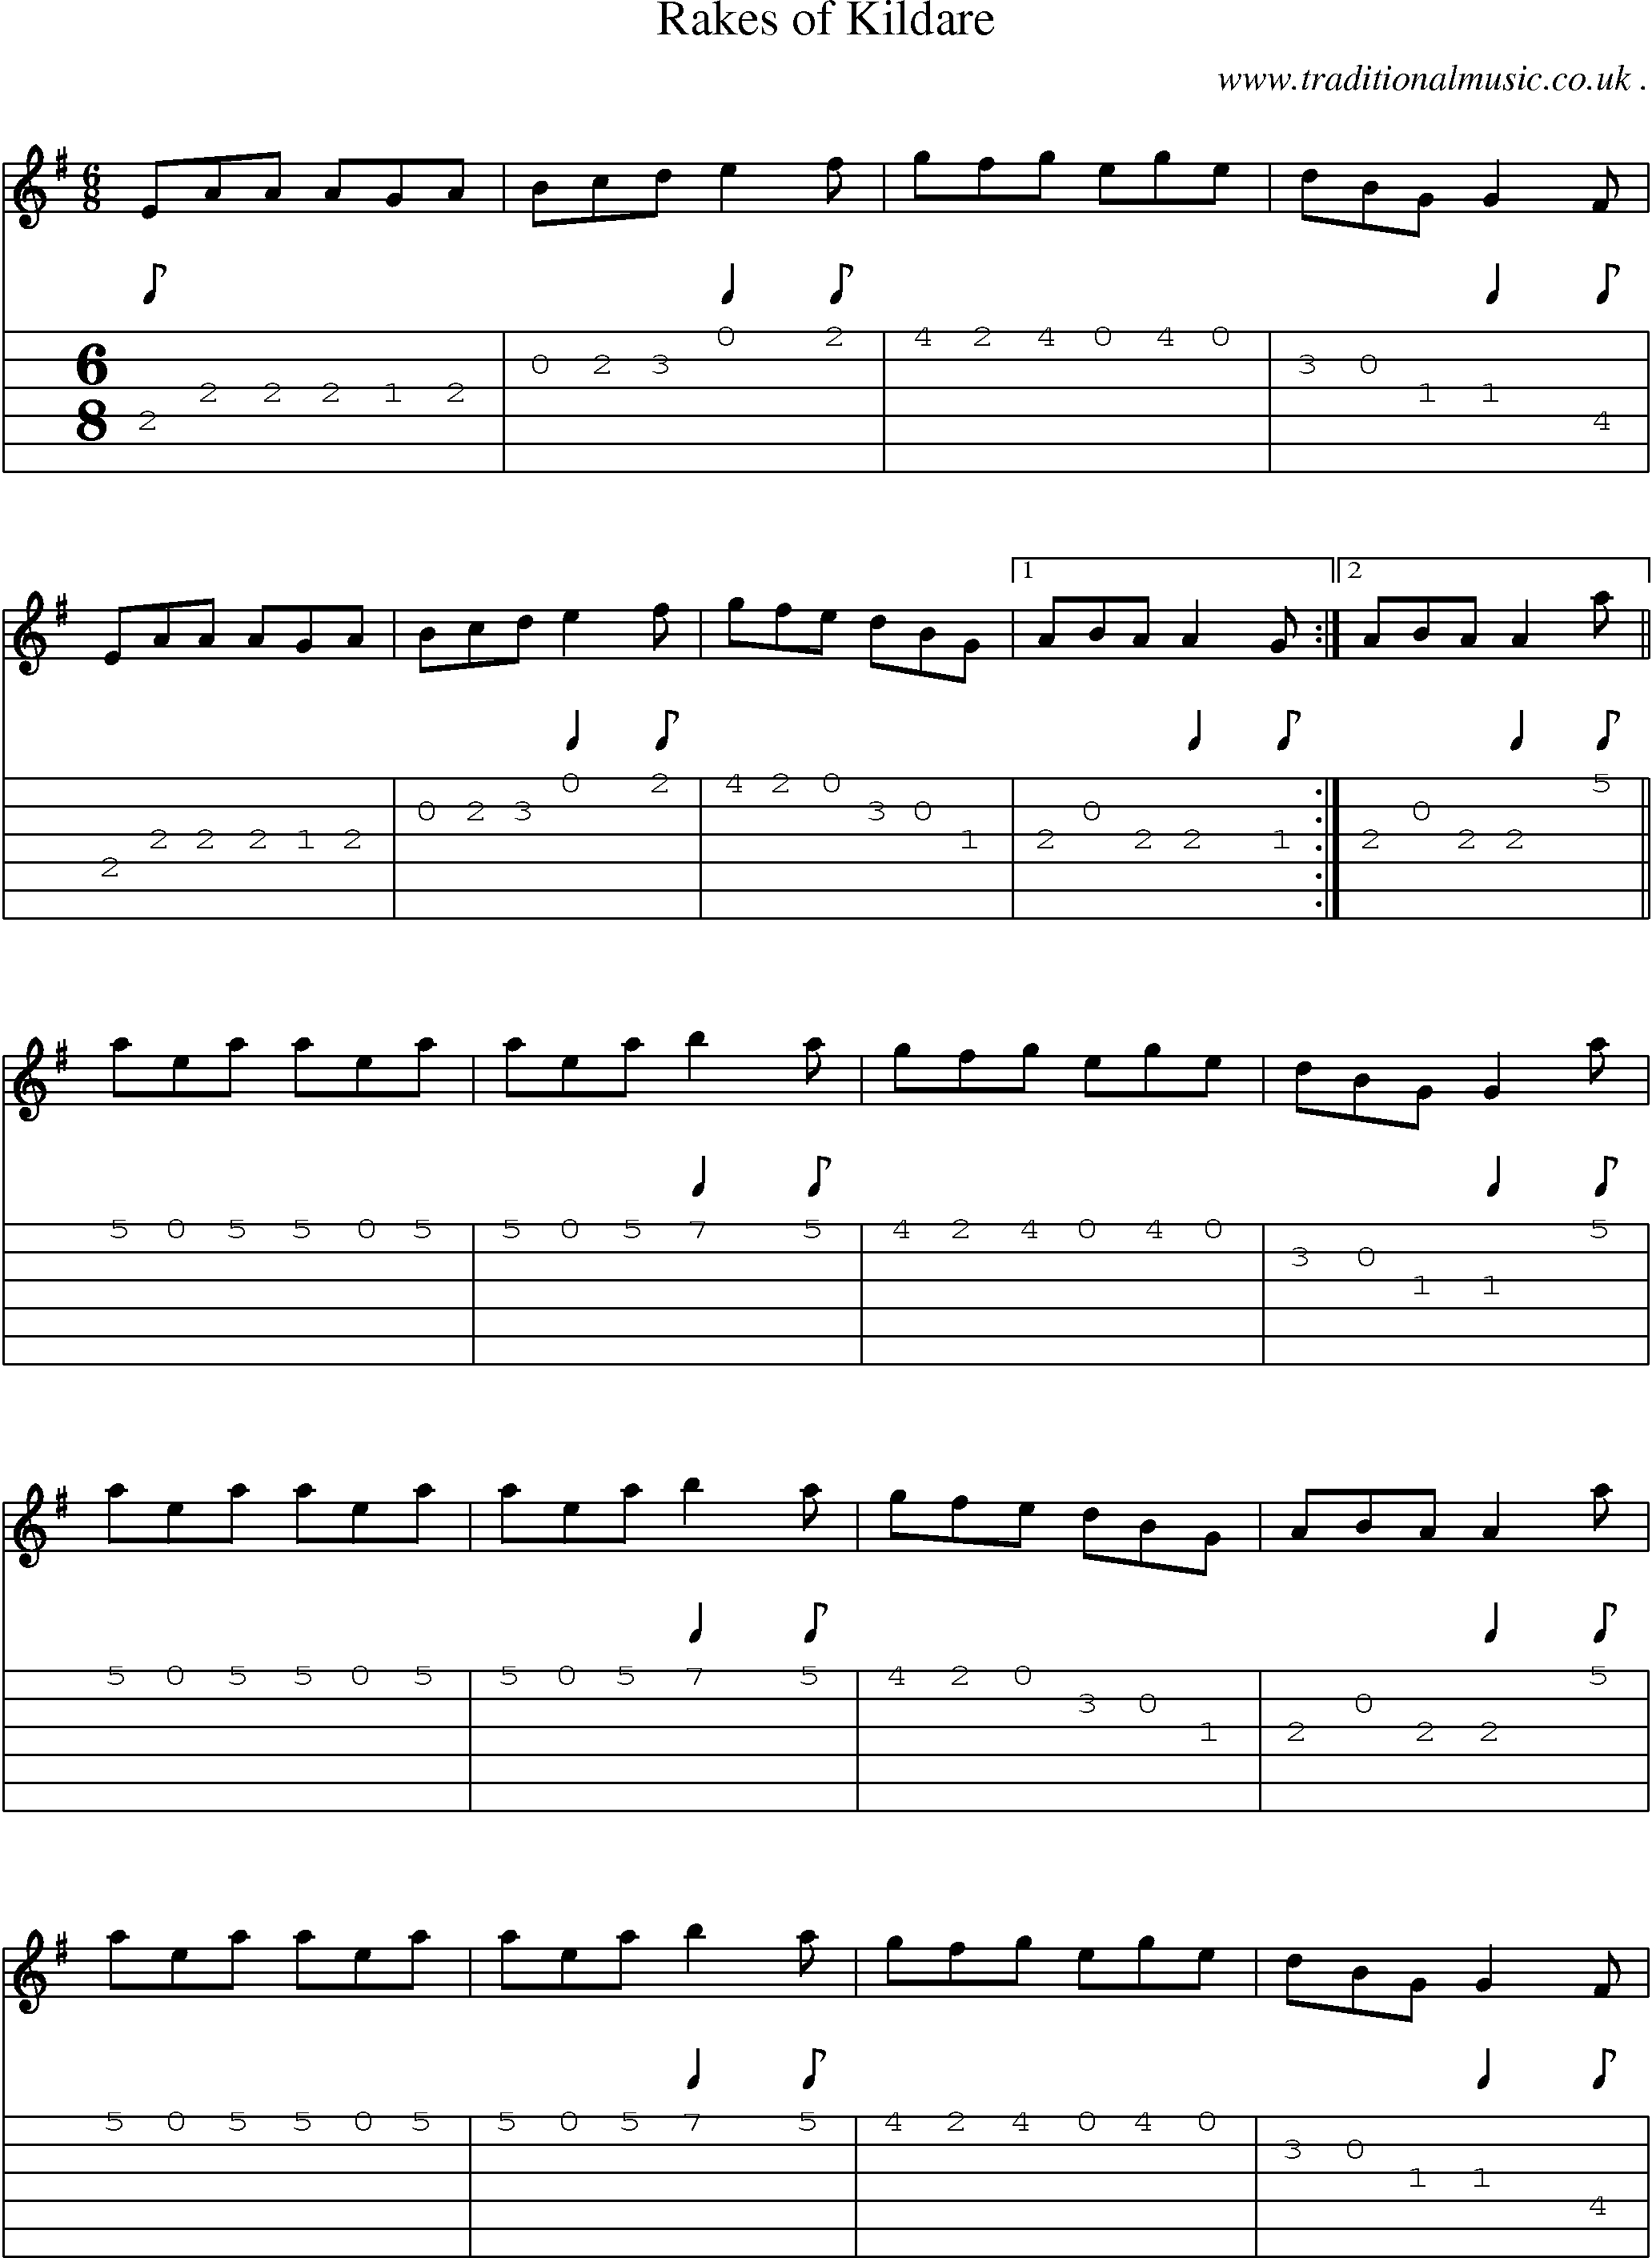 Sheet-Music and Guitar Tabs for Rakes Of Kildare